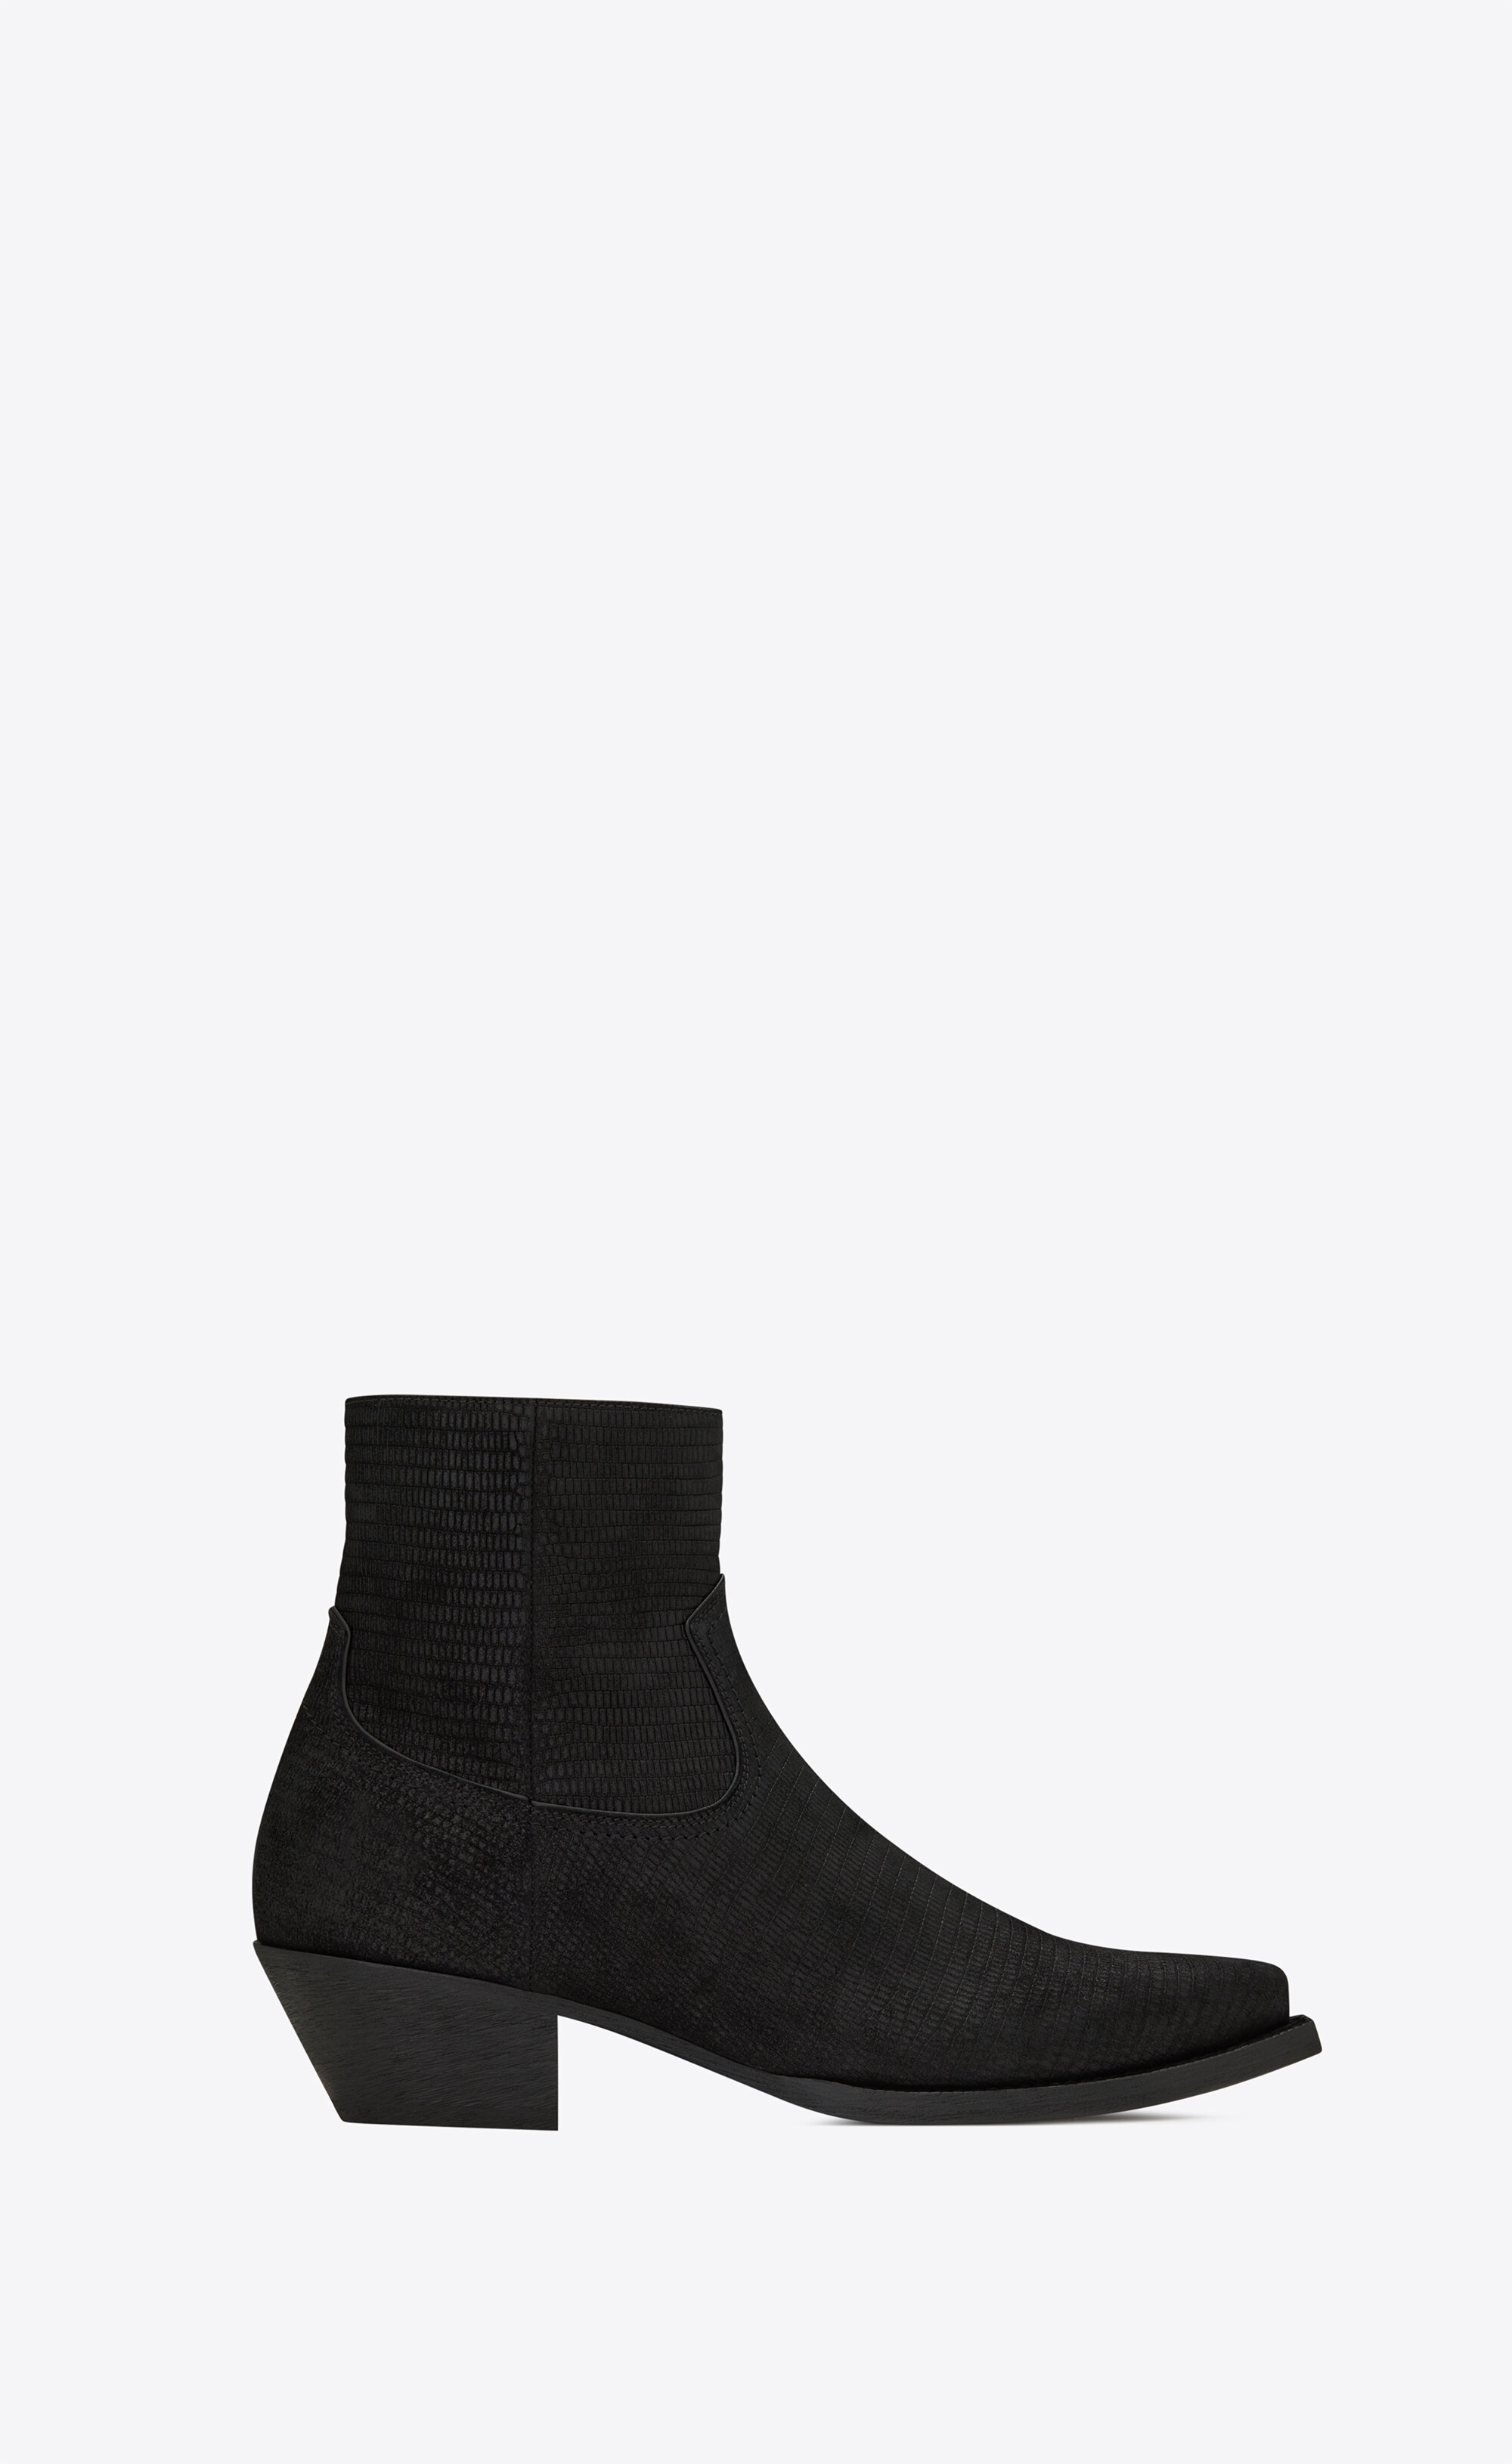 lukas western zipped boots in tejus-embossed suede - 1